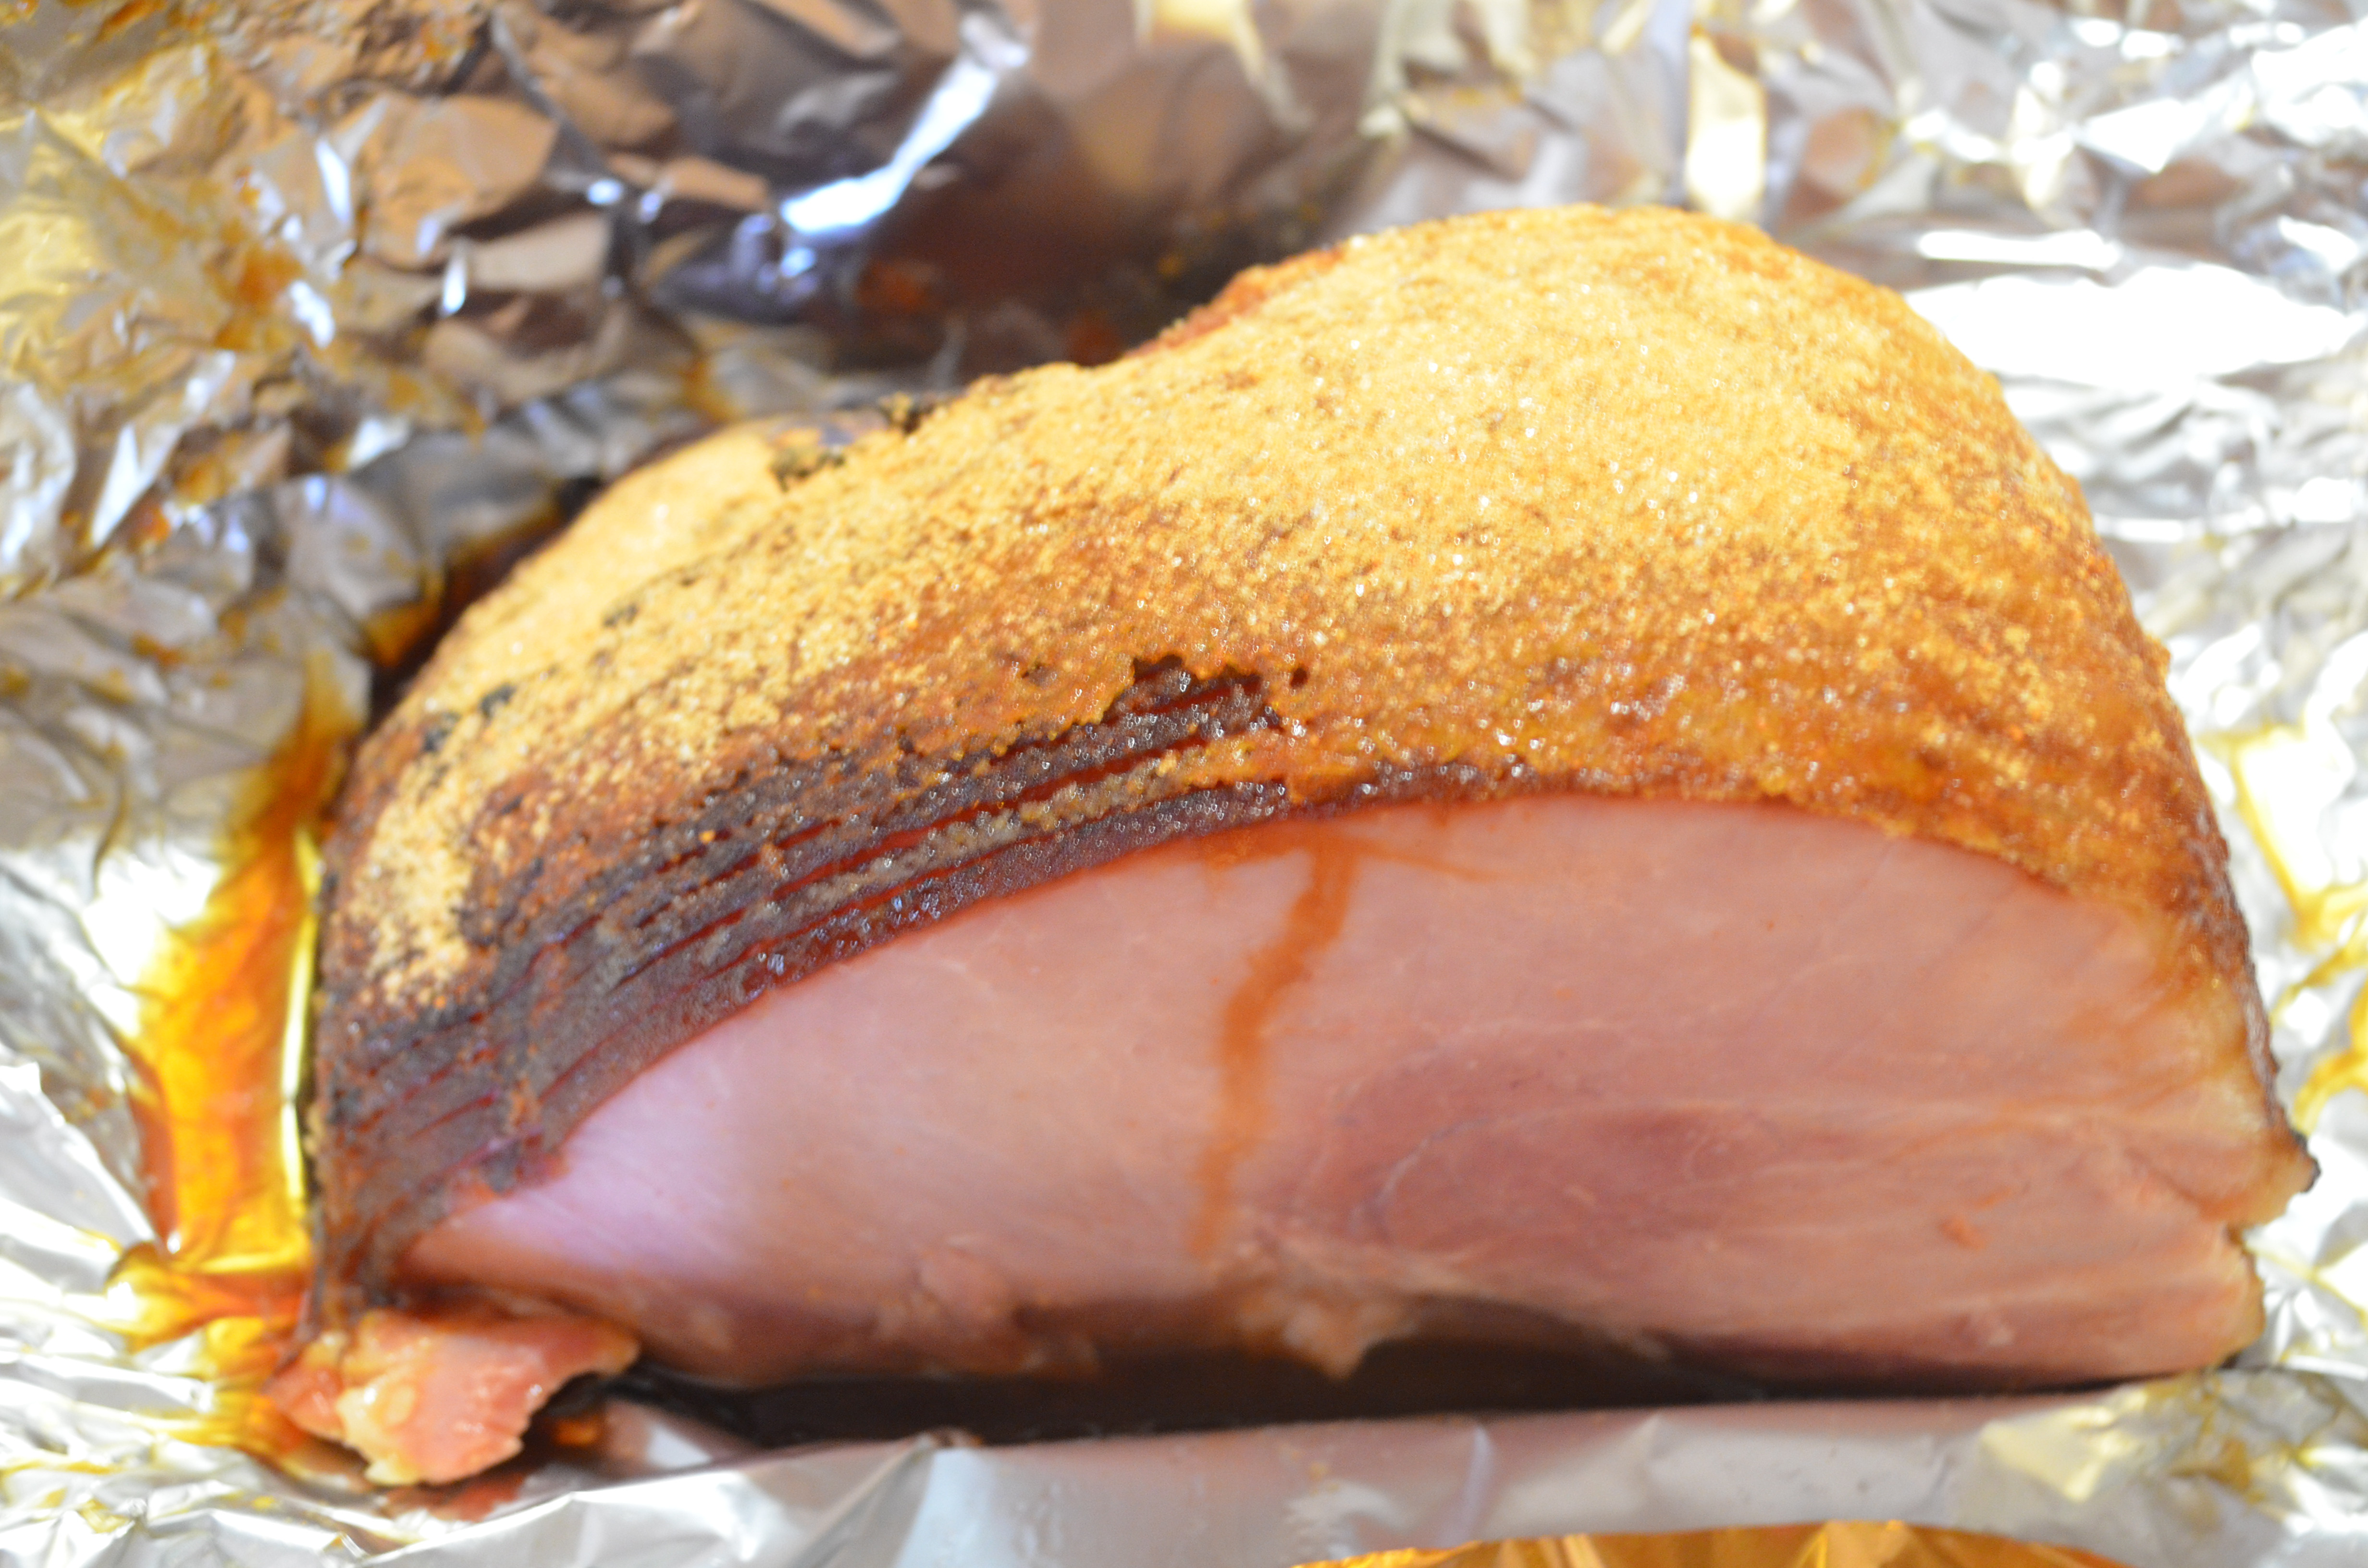 Honey Baked Ham Easter Specials
 Enjoy your Easter Meal with HoneyBaked Ham & Win a $50